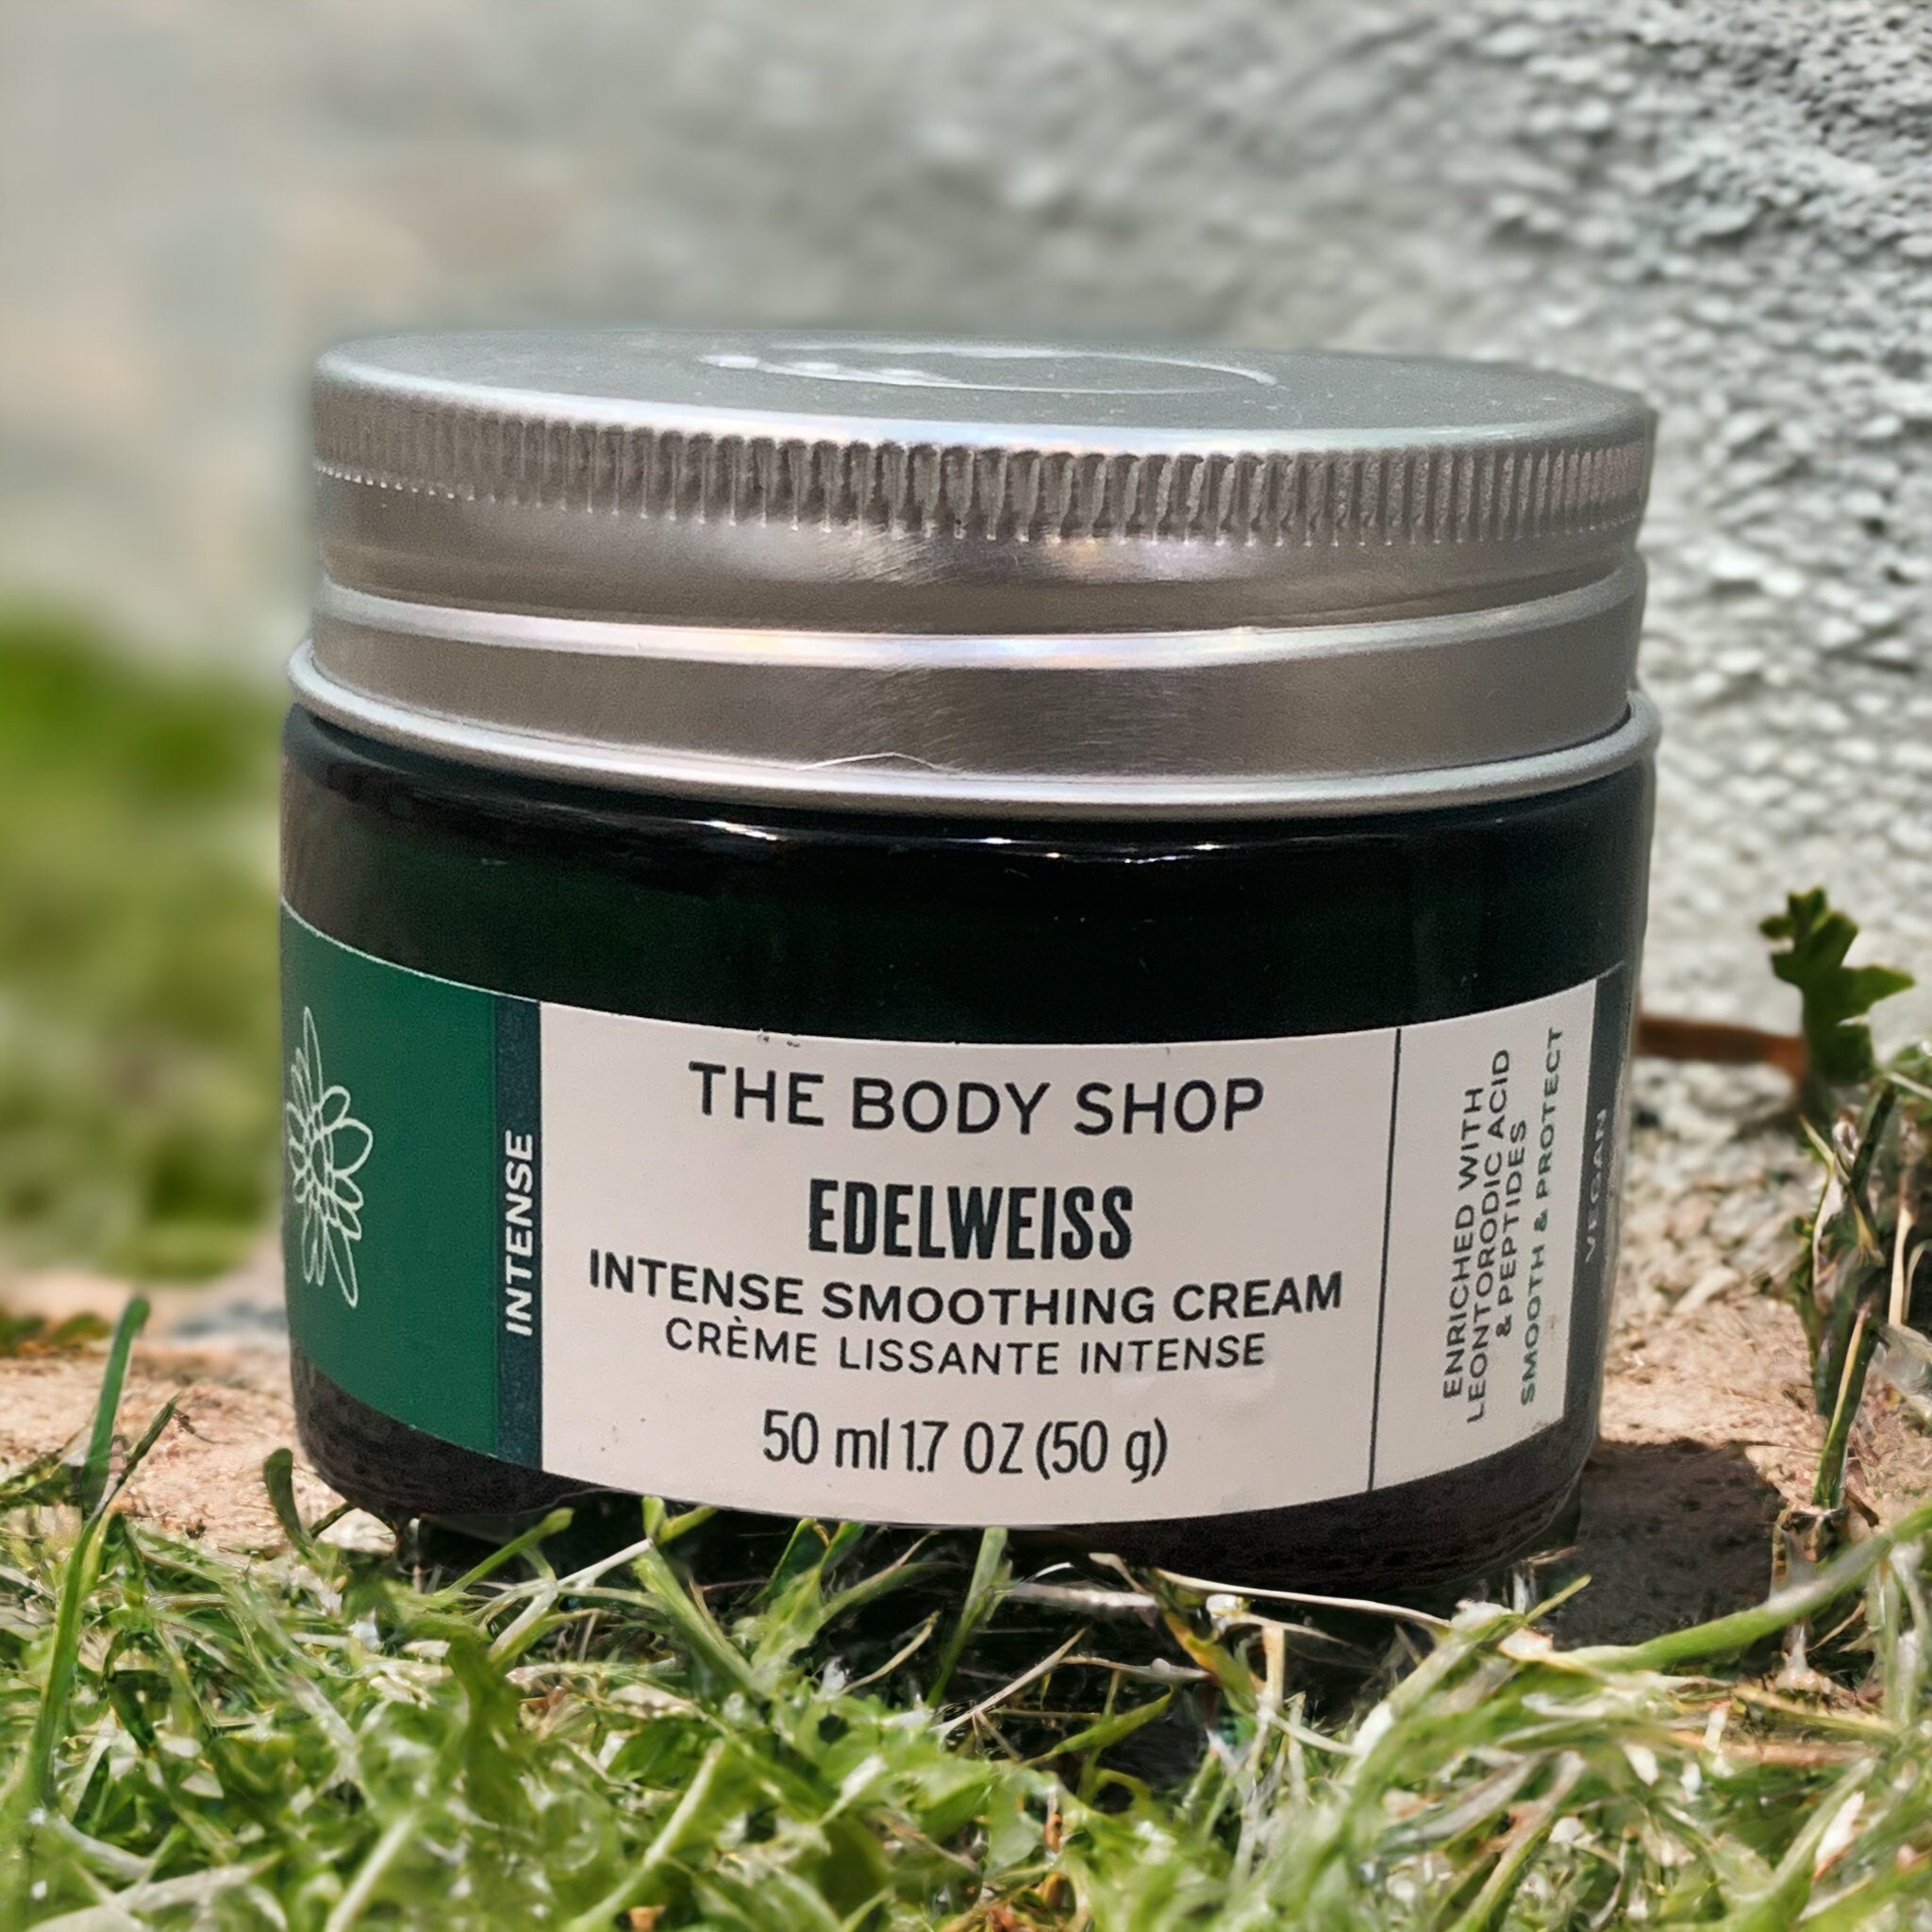 THE BODY SHOP EDELWEISS INTENSE SMOOTHING CREAM